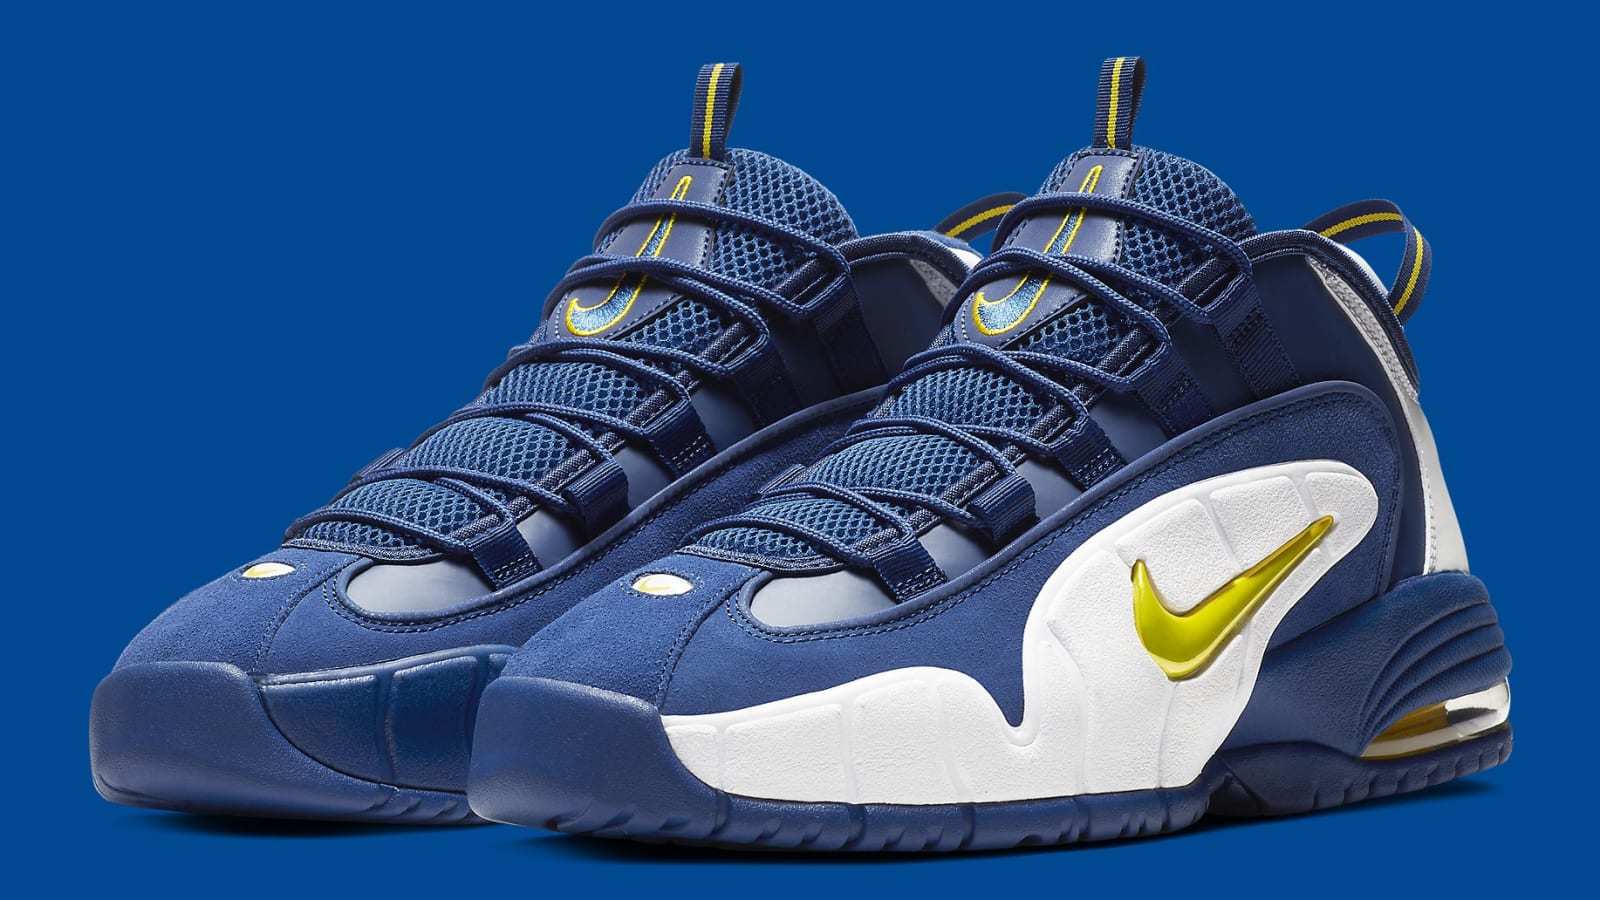 nike-air-max-penny-1-warriors-release-date-685153-401-pair